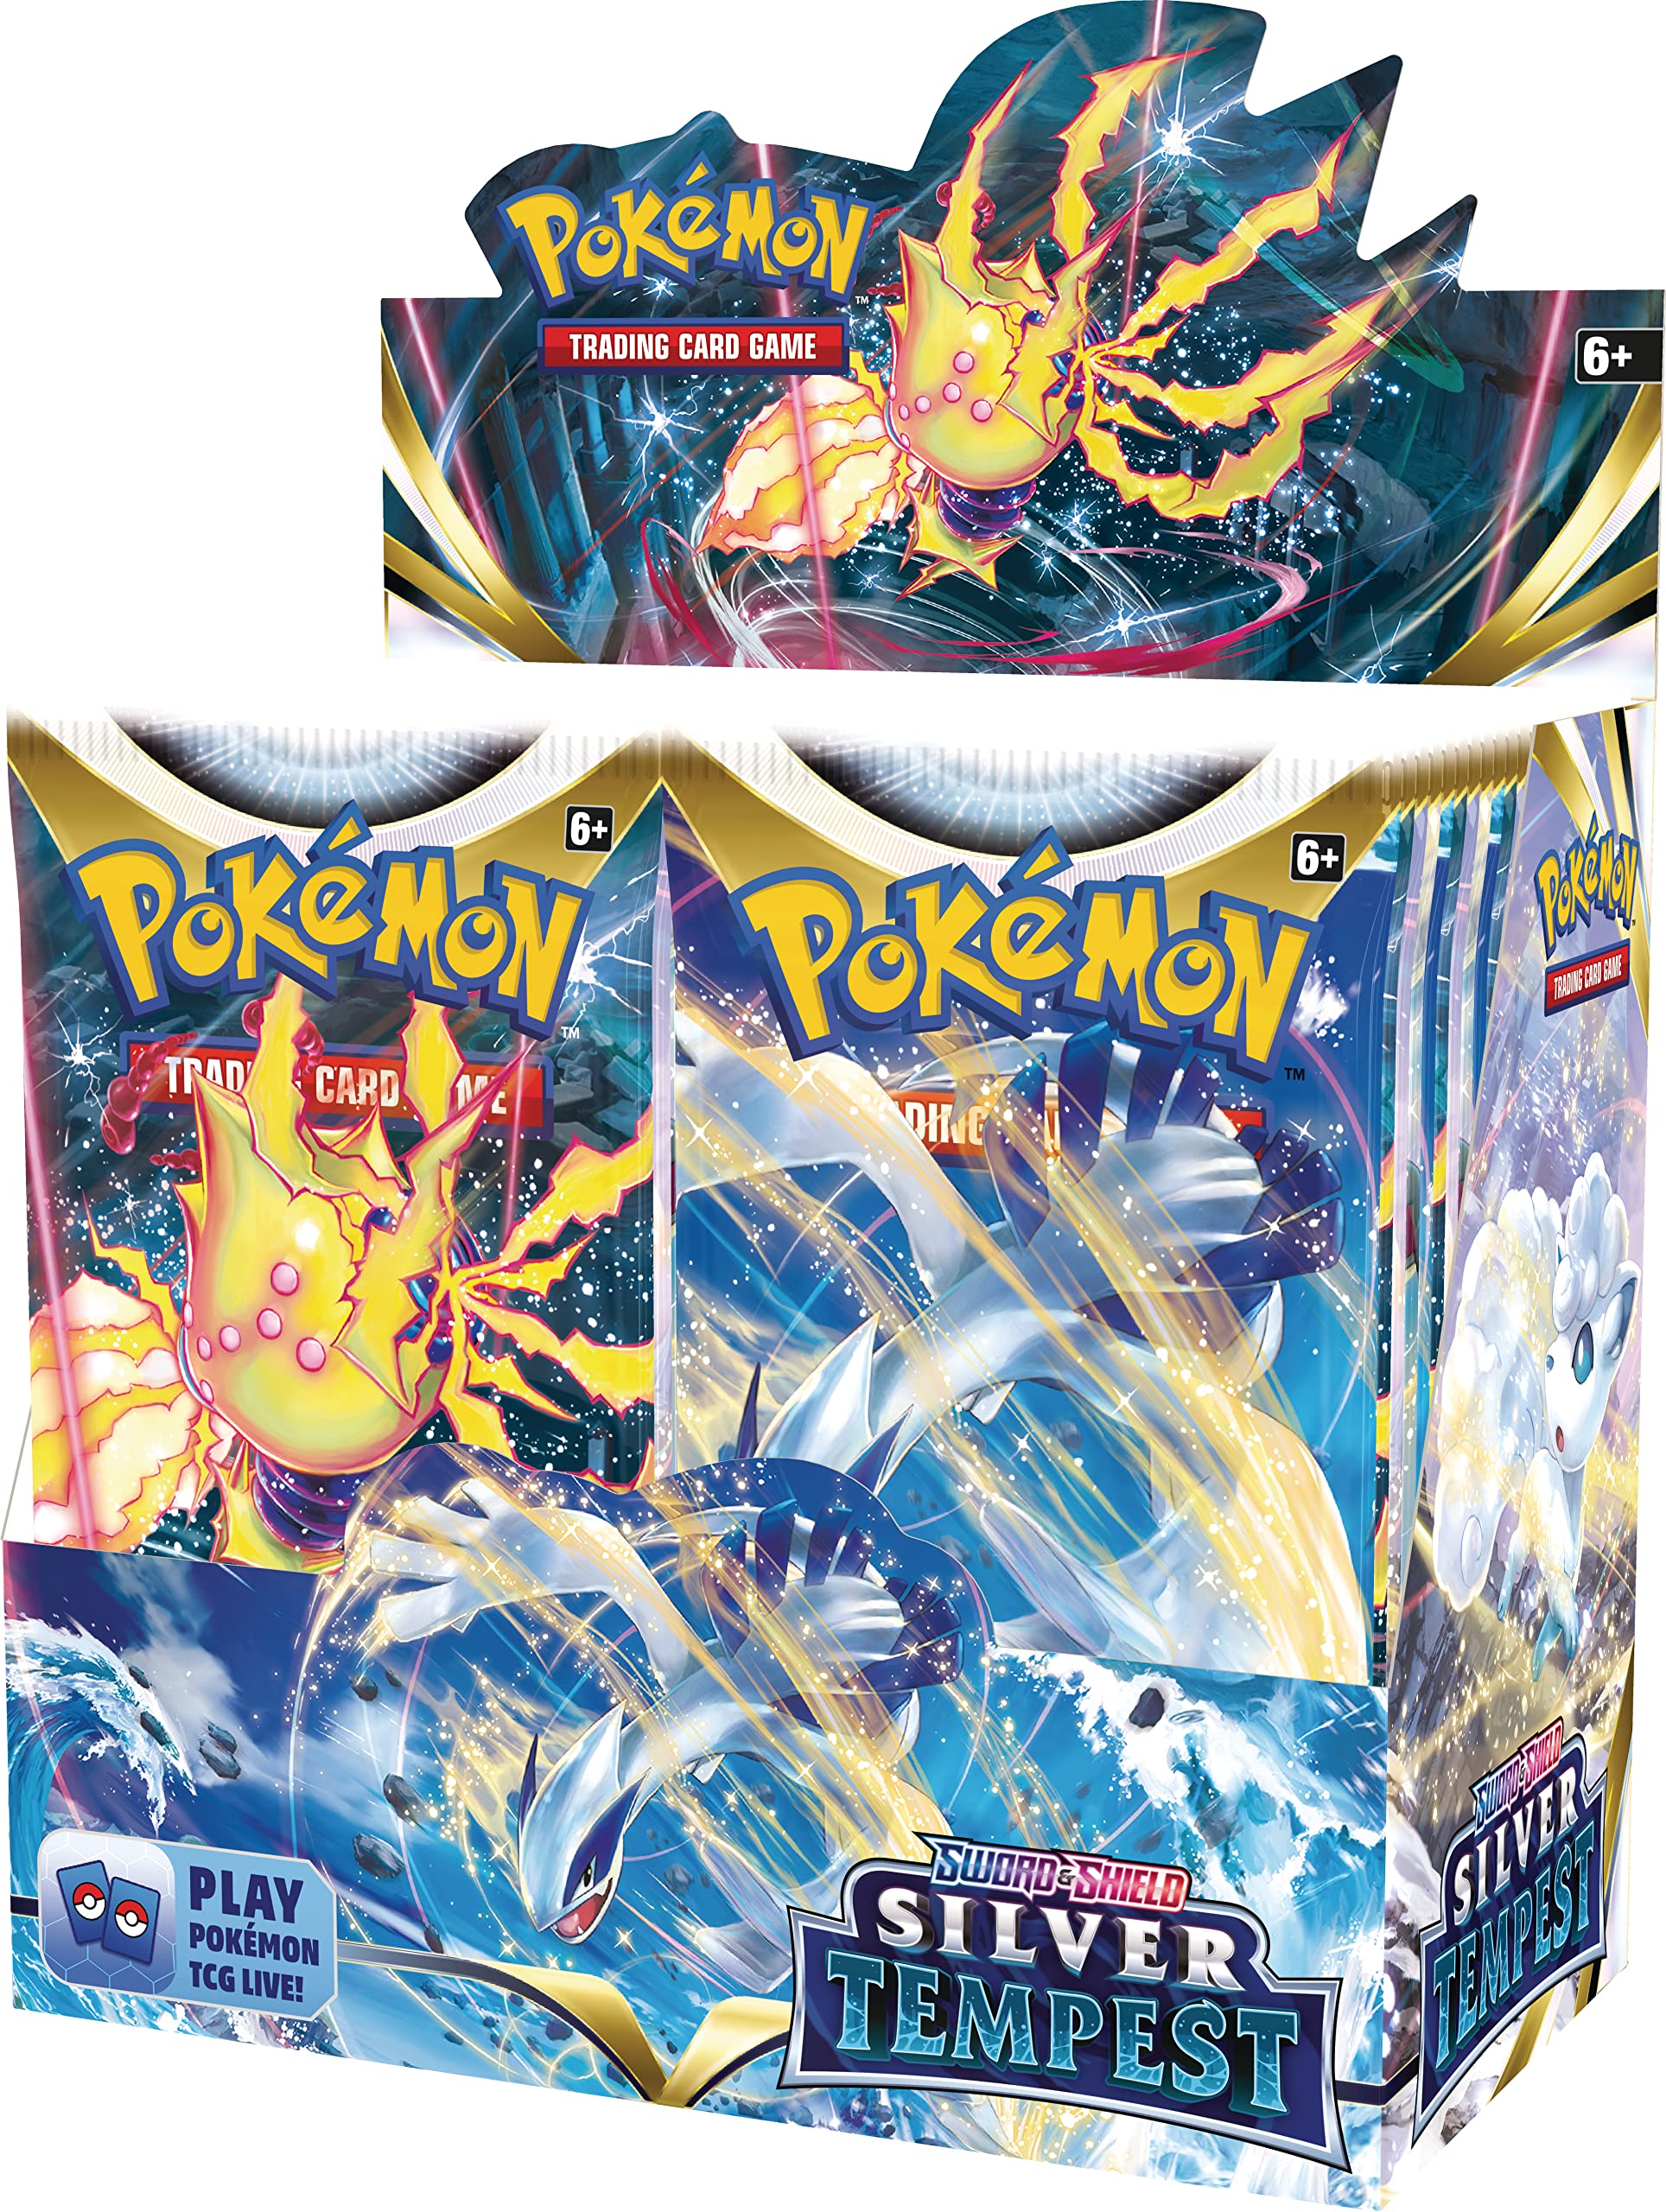 Pokémon Trading Card Game - Sword & Shield: Silver Tempest - Booster Box | Viridian Forest